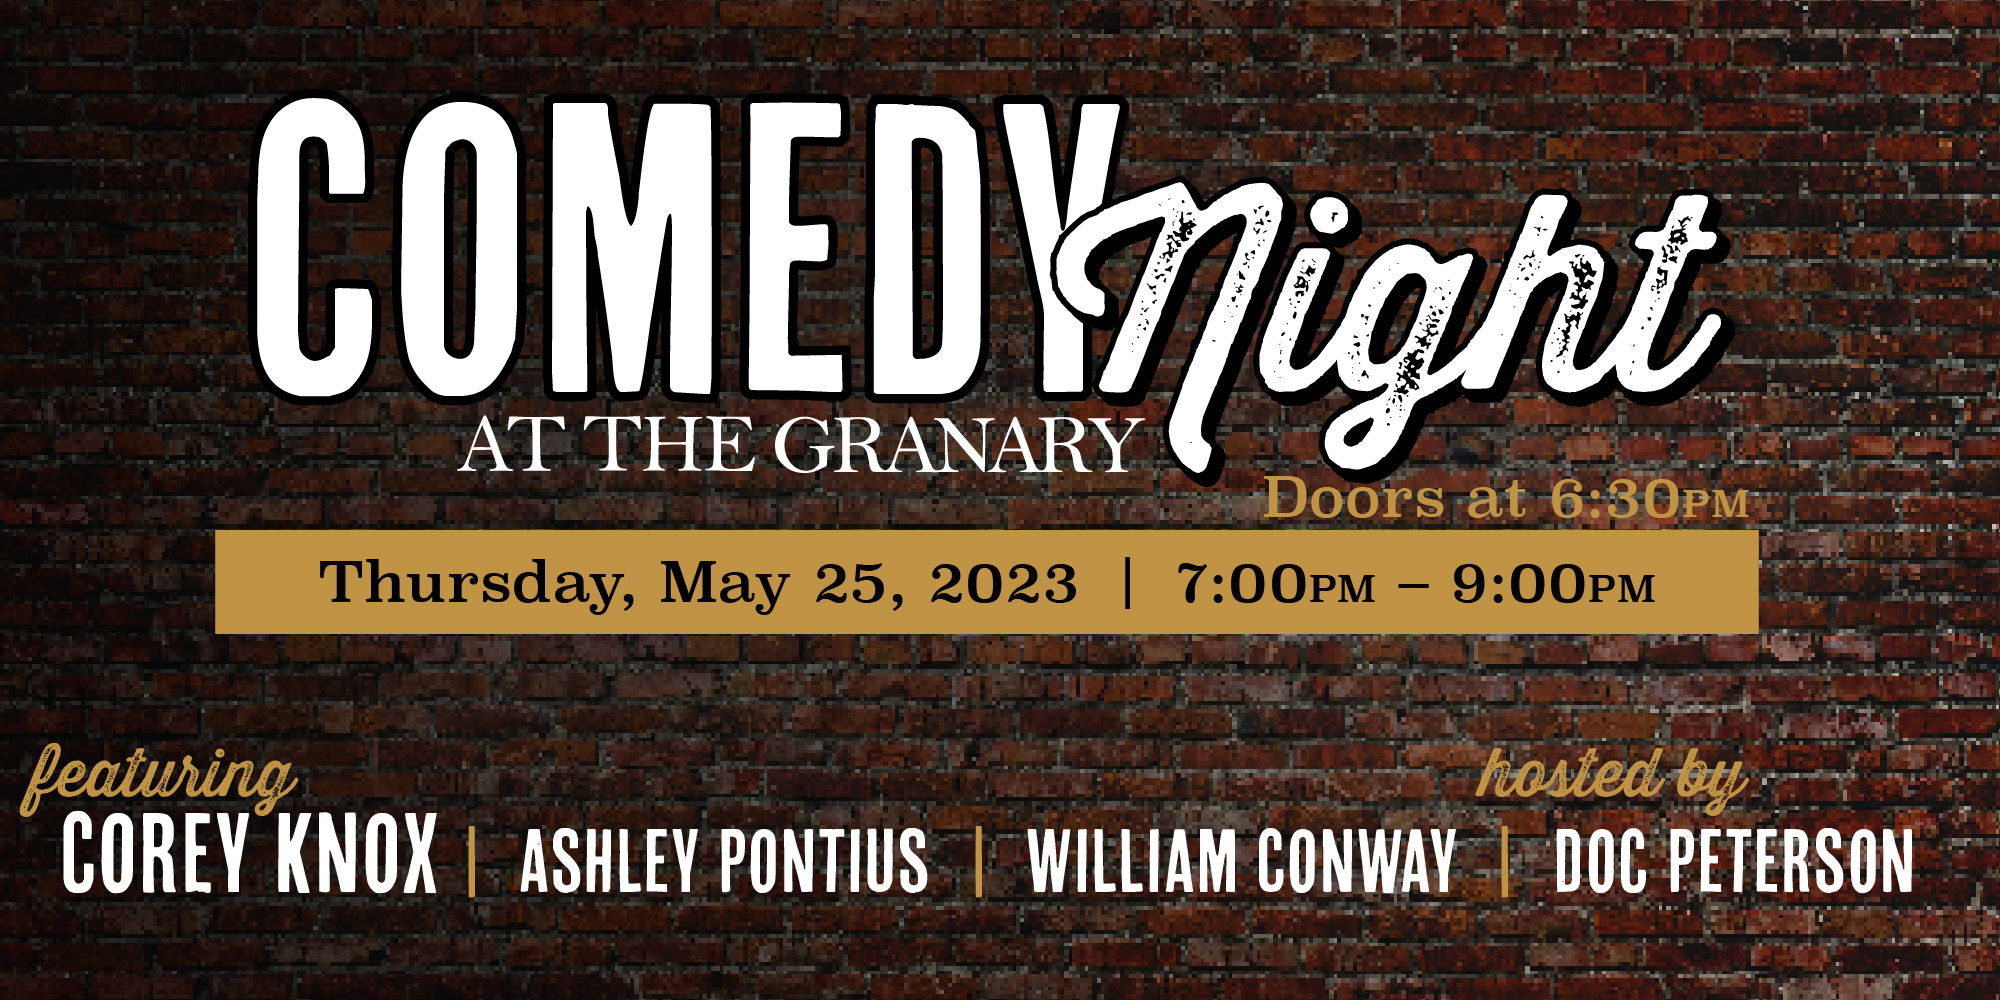 Doc Peterson Presents Comedy Night at The Granary, featuring Corey Knox promotional image